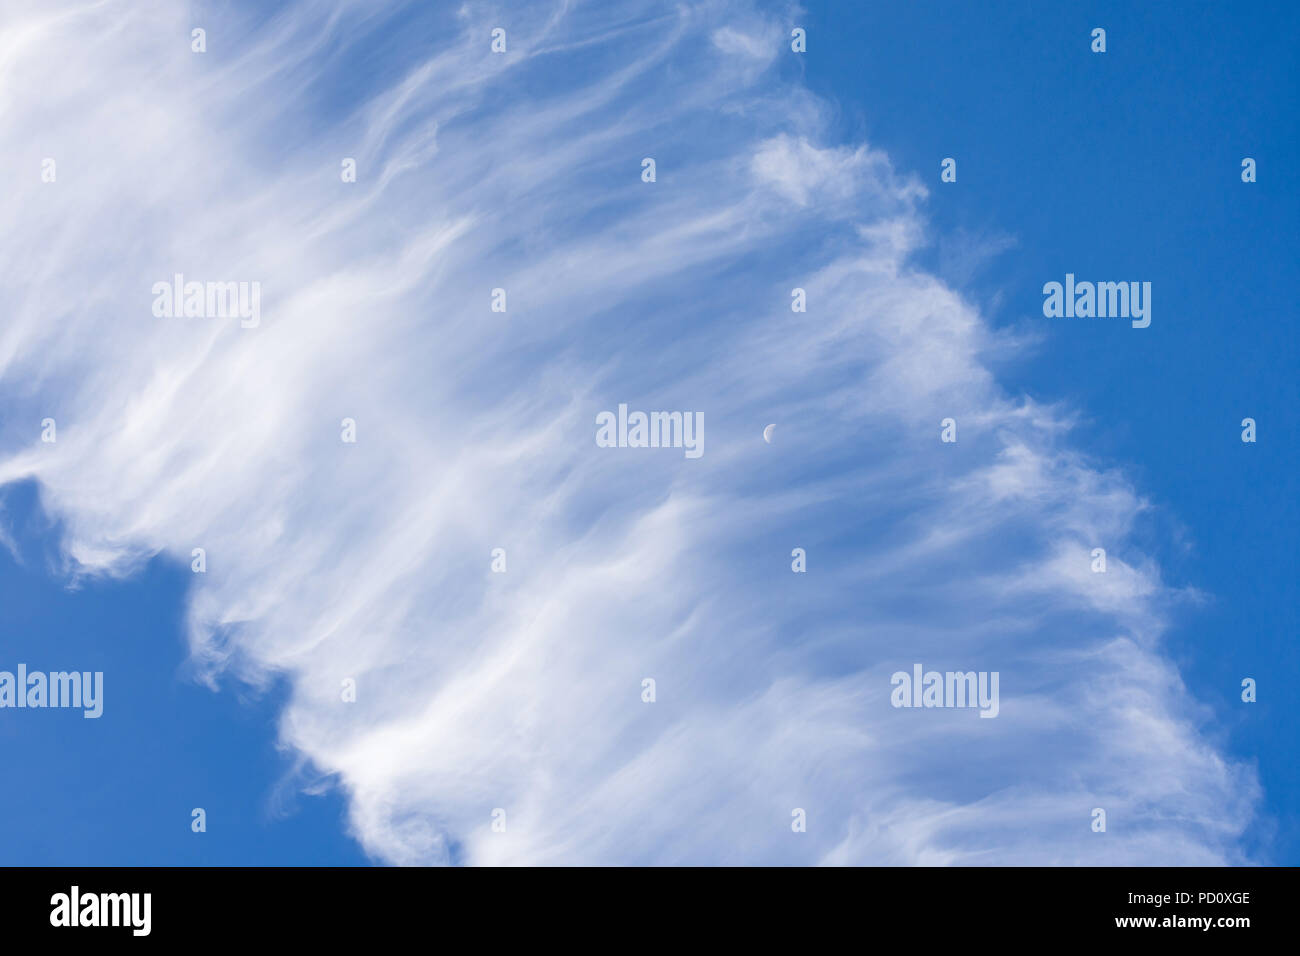 Windblown contrails in blue sky with half moon. Stock Photo